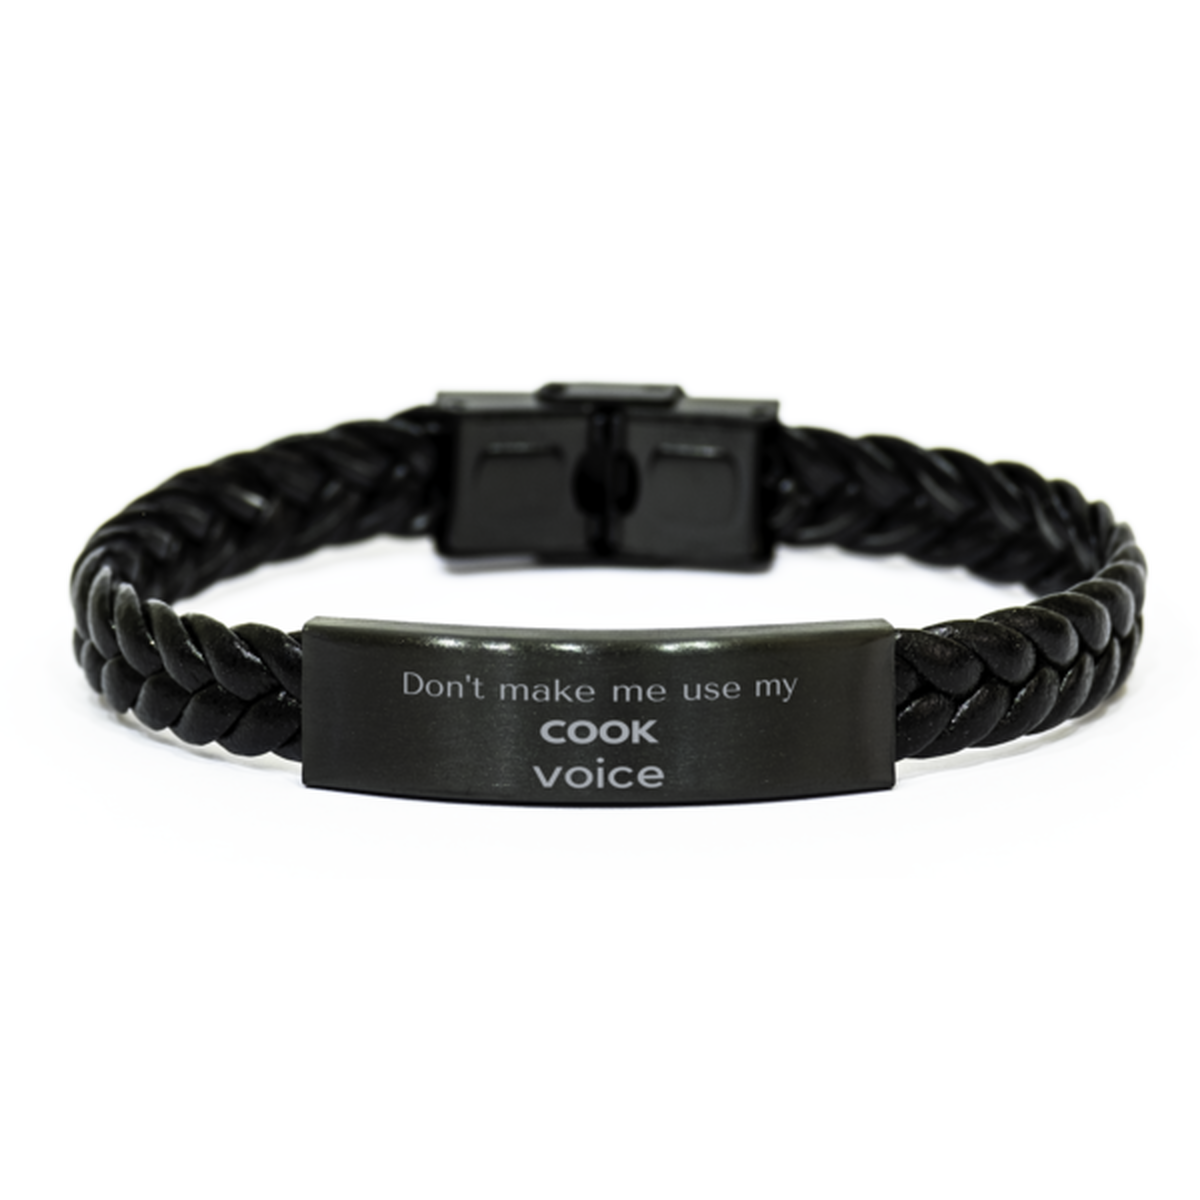 Don't make me use my Cook voice, Sarcasm Cook Gifts, Christmas Cook Braided Leather Bracelet Birthday Unique Gifts For Cook Coworkers, Men, Women, Colleague, Friends